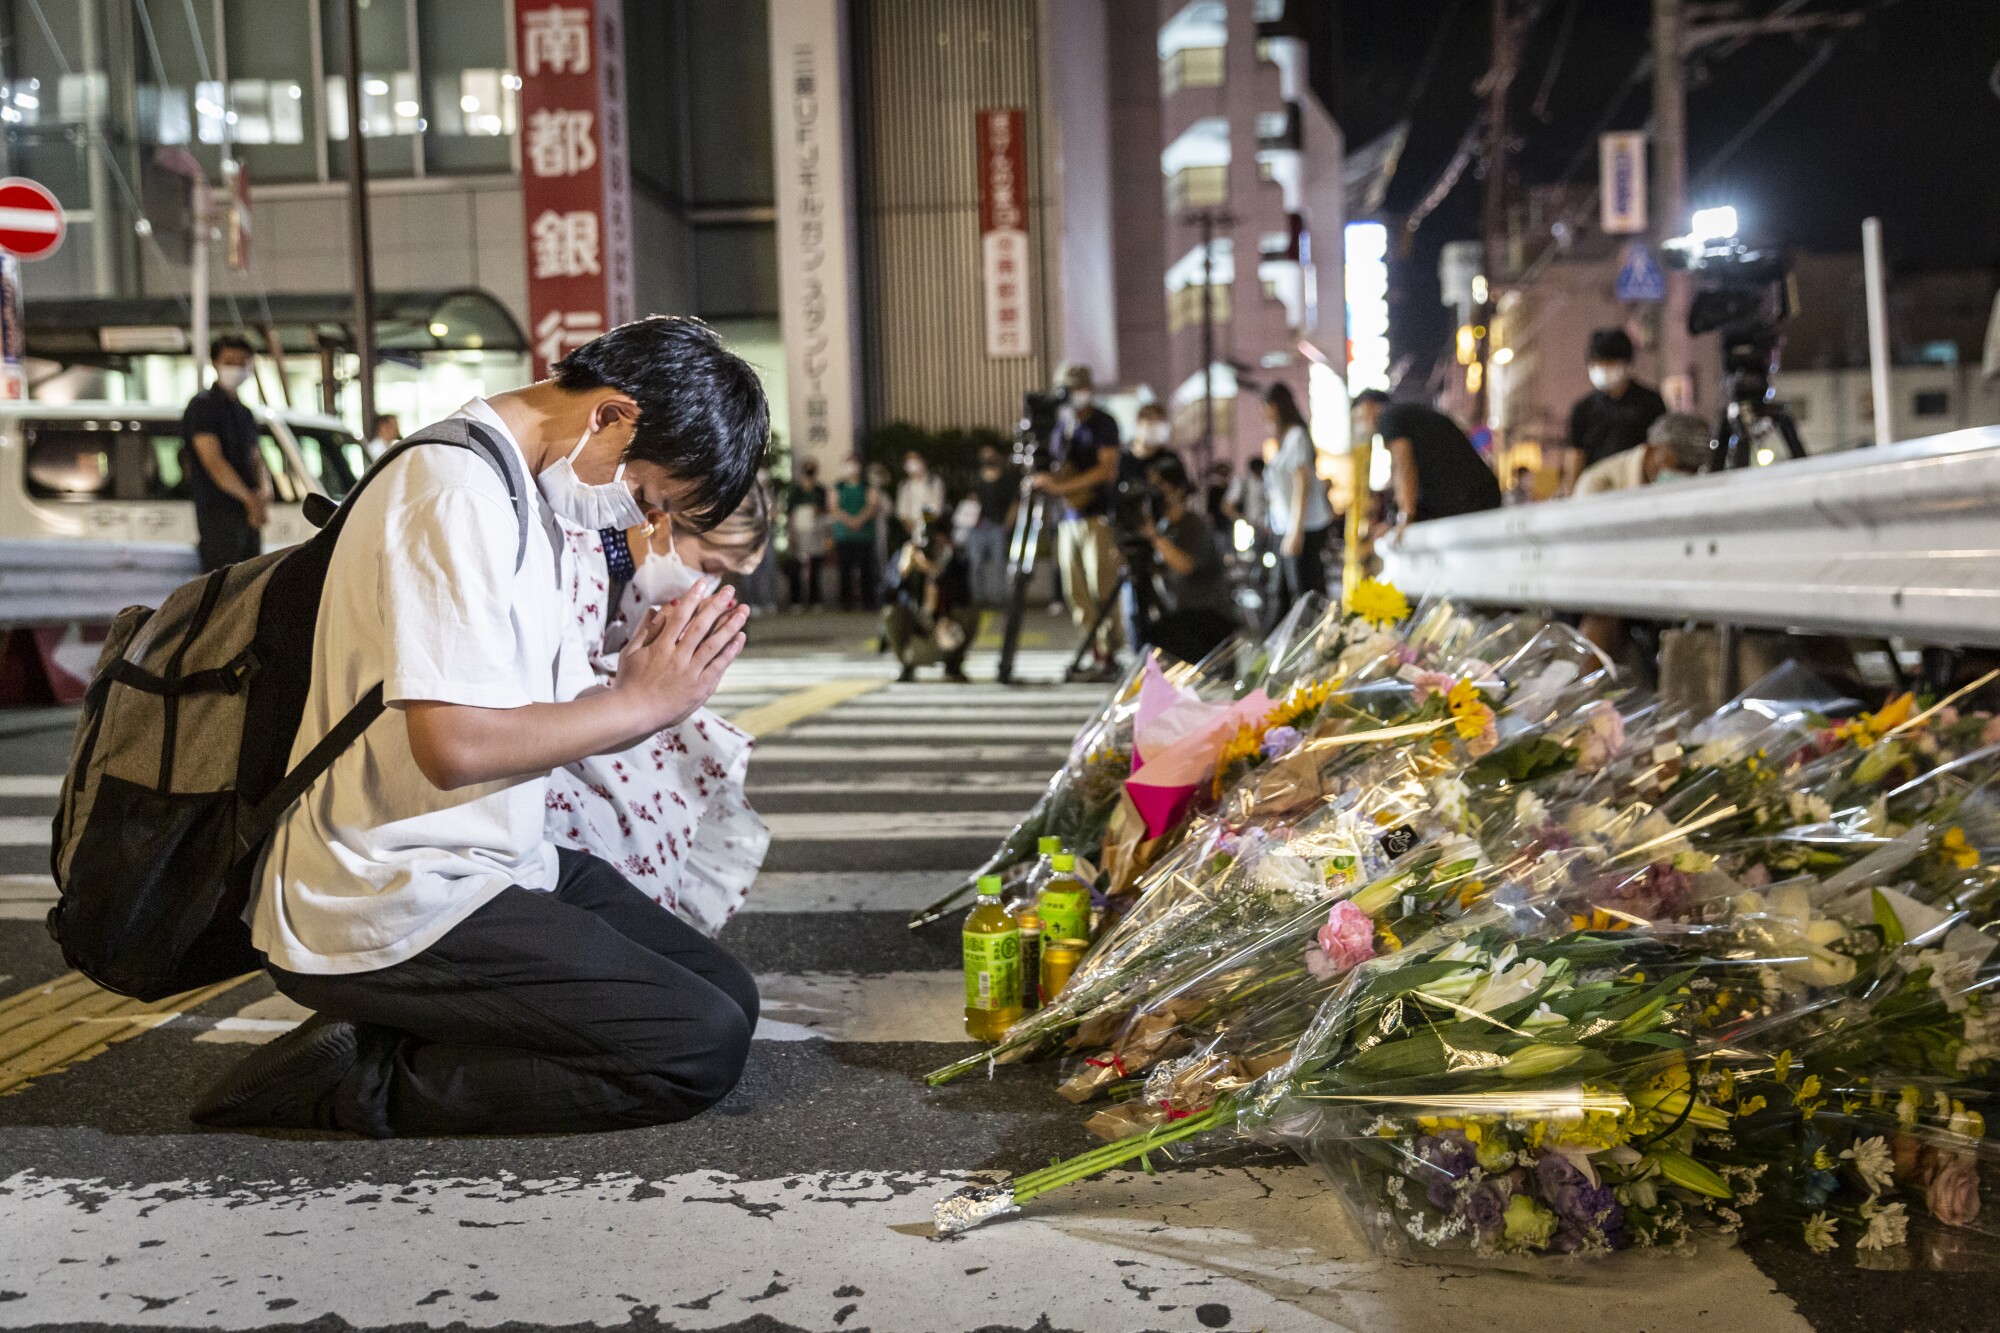 People pray at the site near the Yamato-Saidaiji station where former Japanese Prime Minister Shinzo Abe was shot dead.